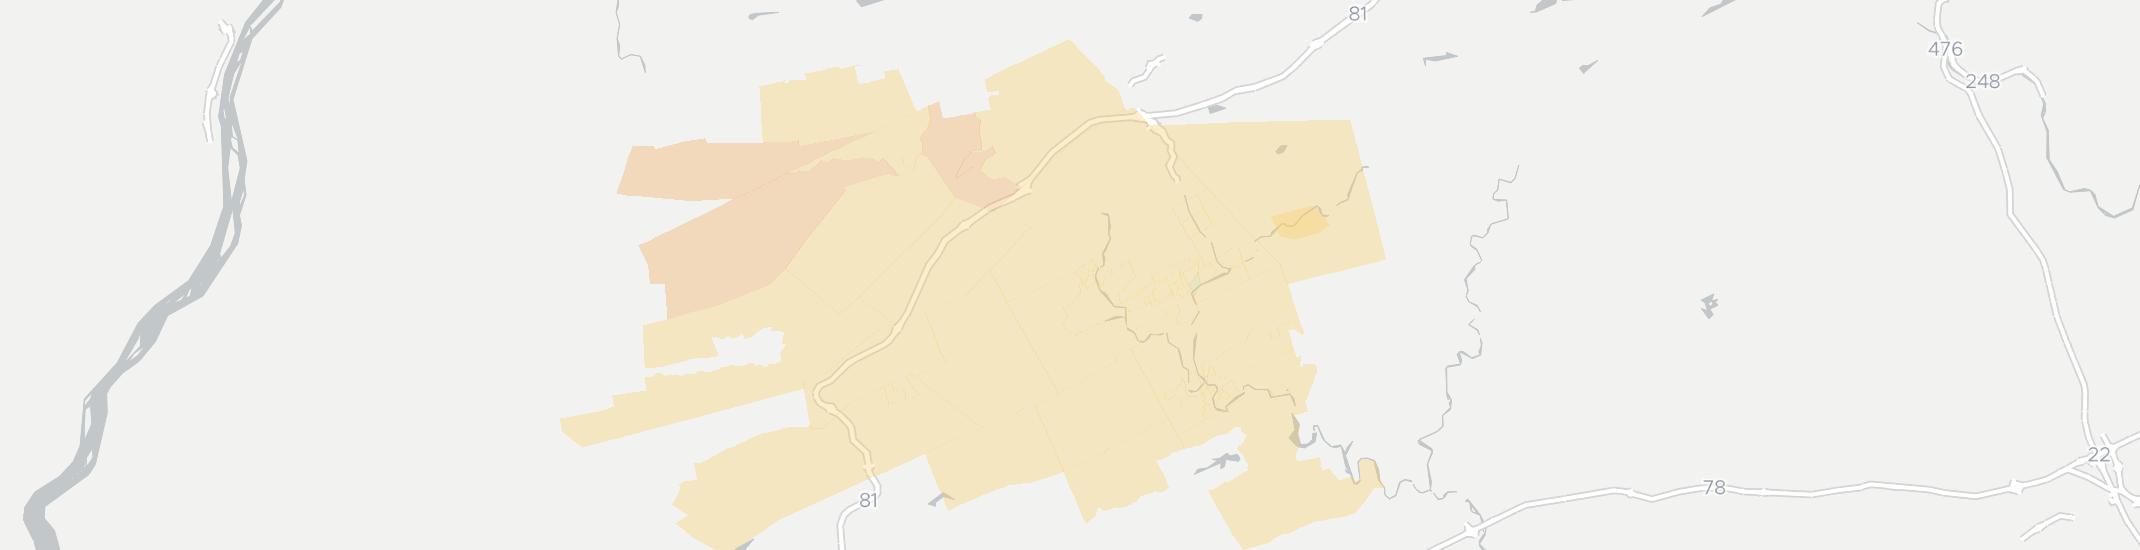 Pottsville Internet Competition Map. Click for interactive map.